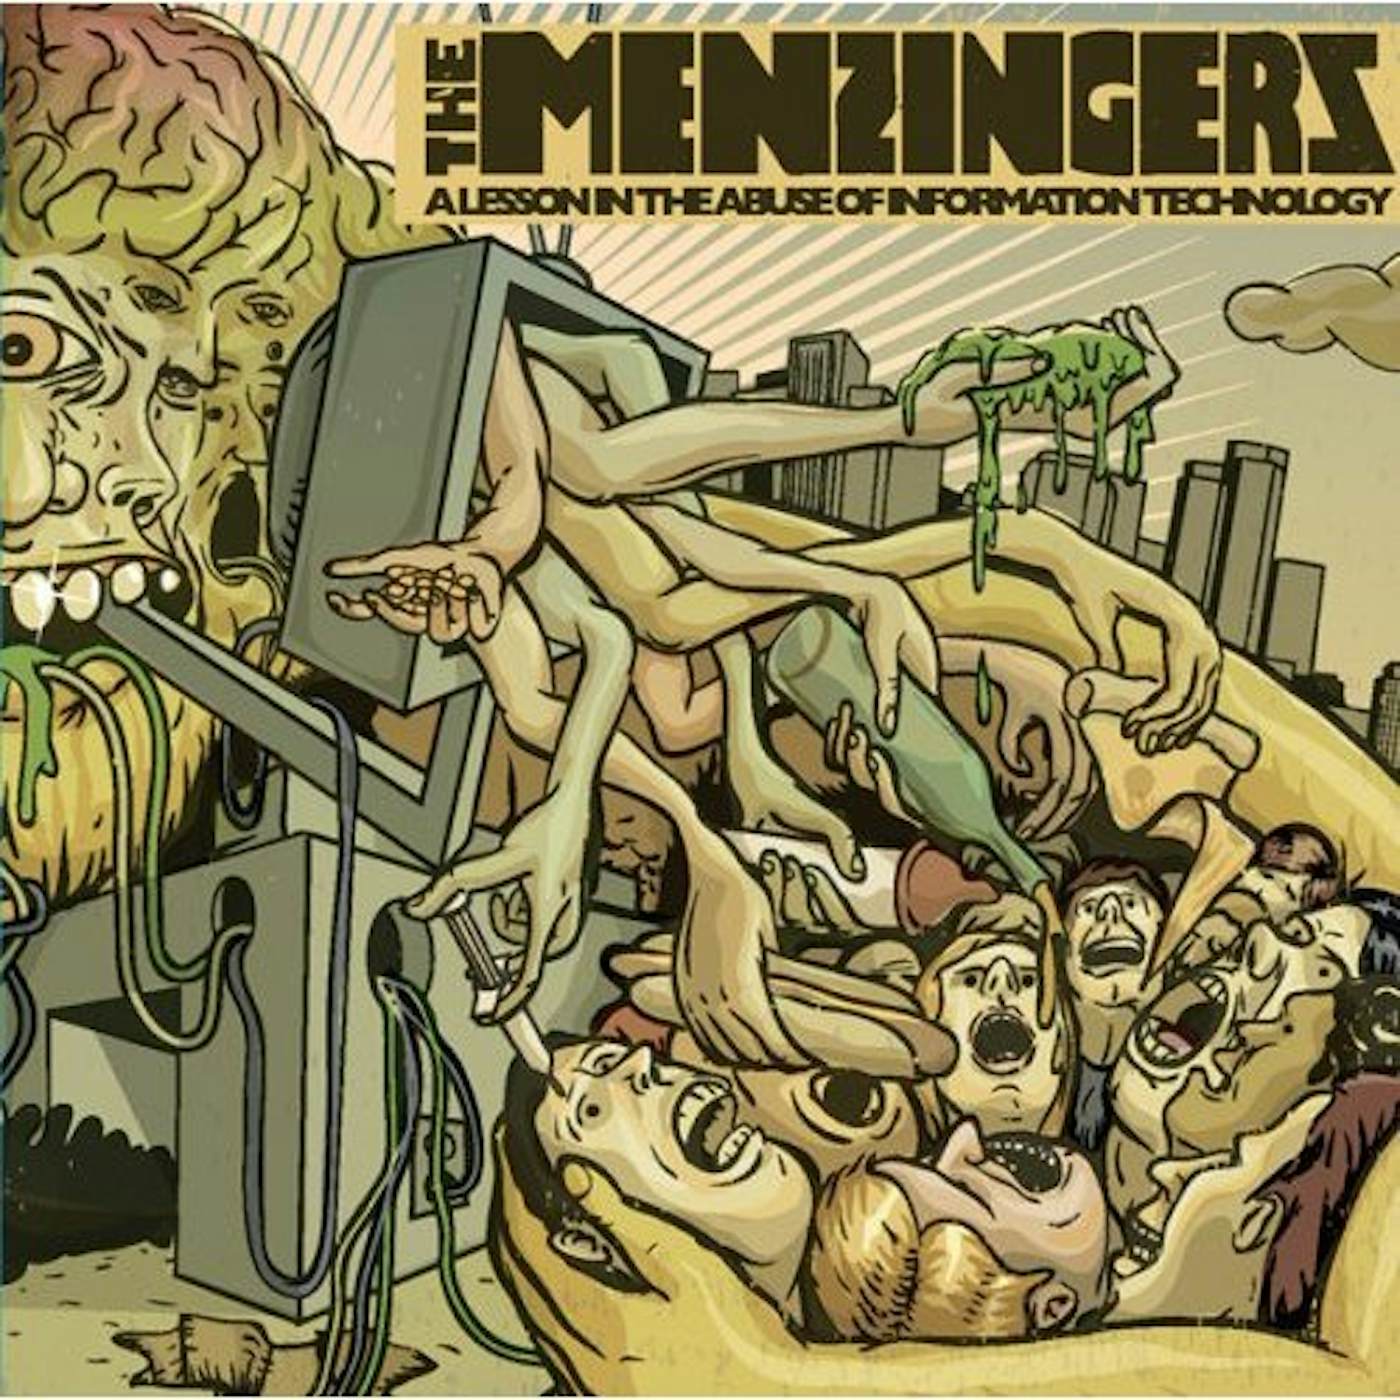 The Menzingers LESSON IN THE ABUSE OF INFORMATION TECHNOLOGY Vinyl Record